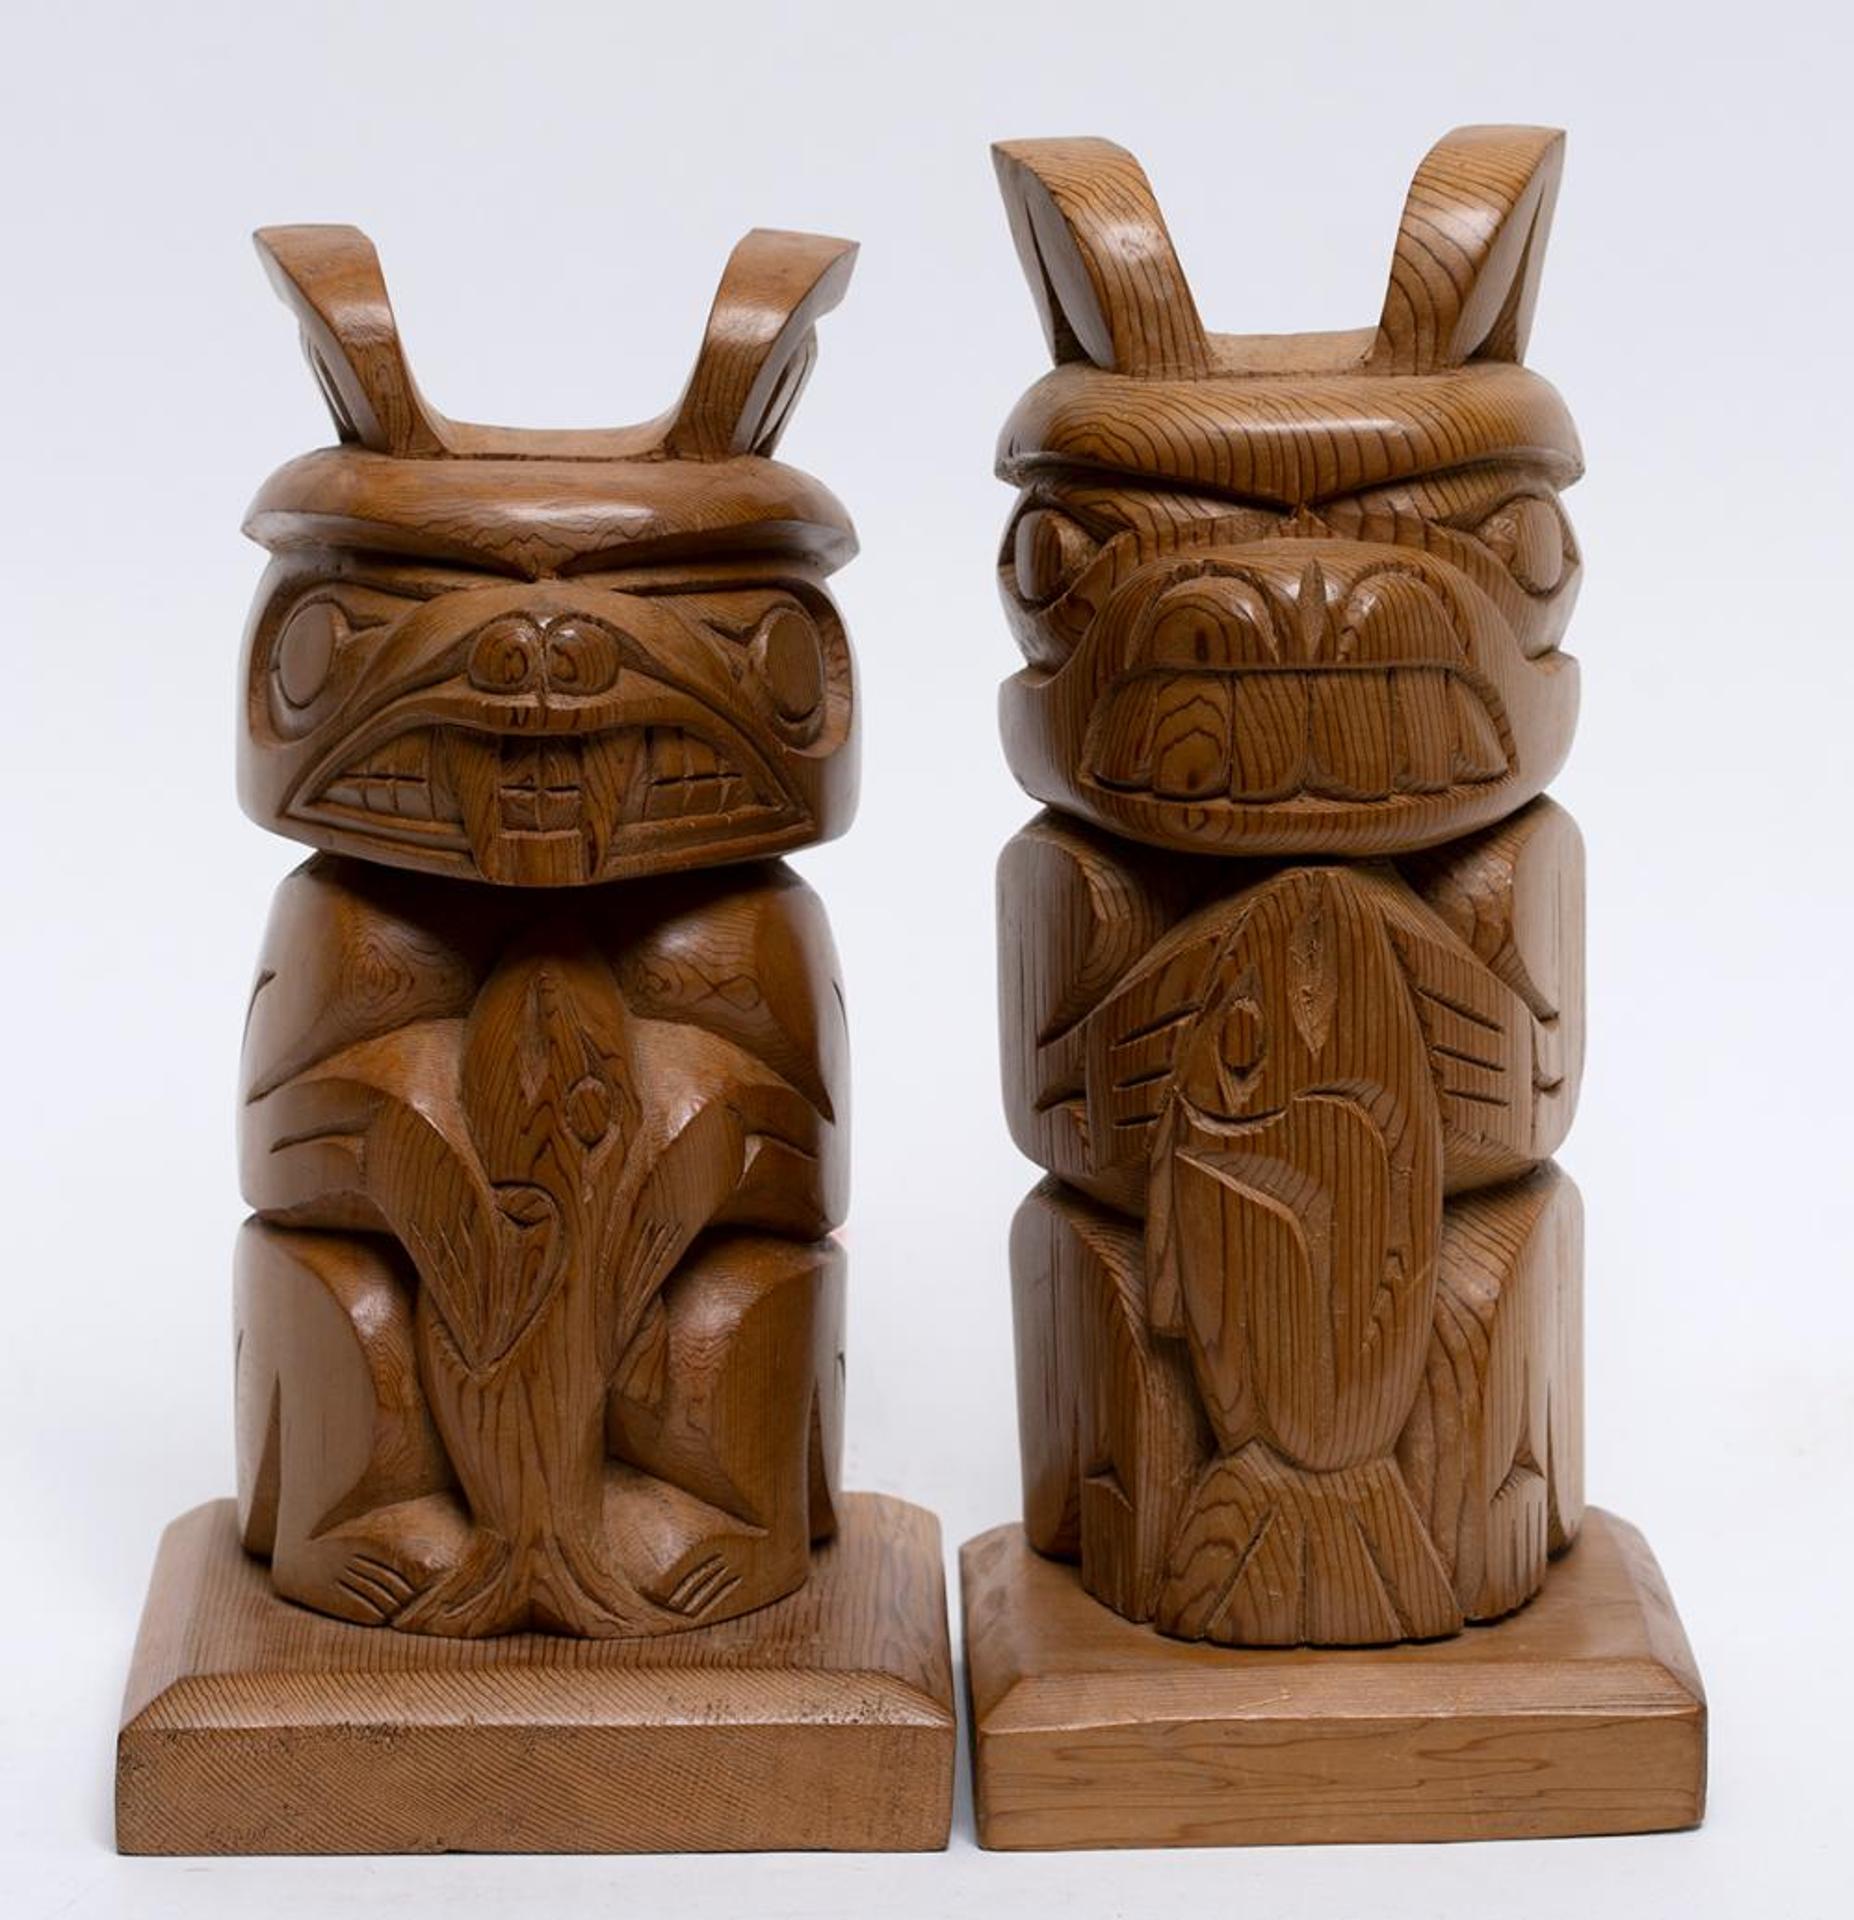 R. Swift - Two Carved Cedar Totems